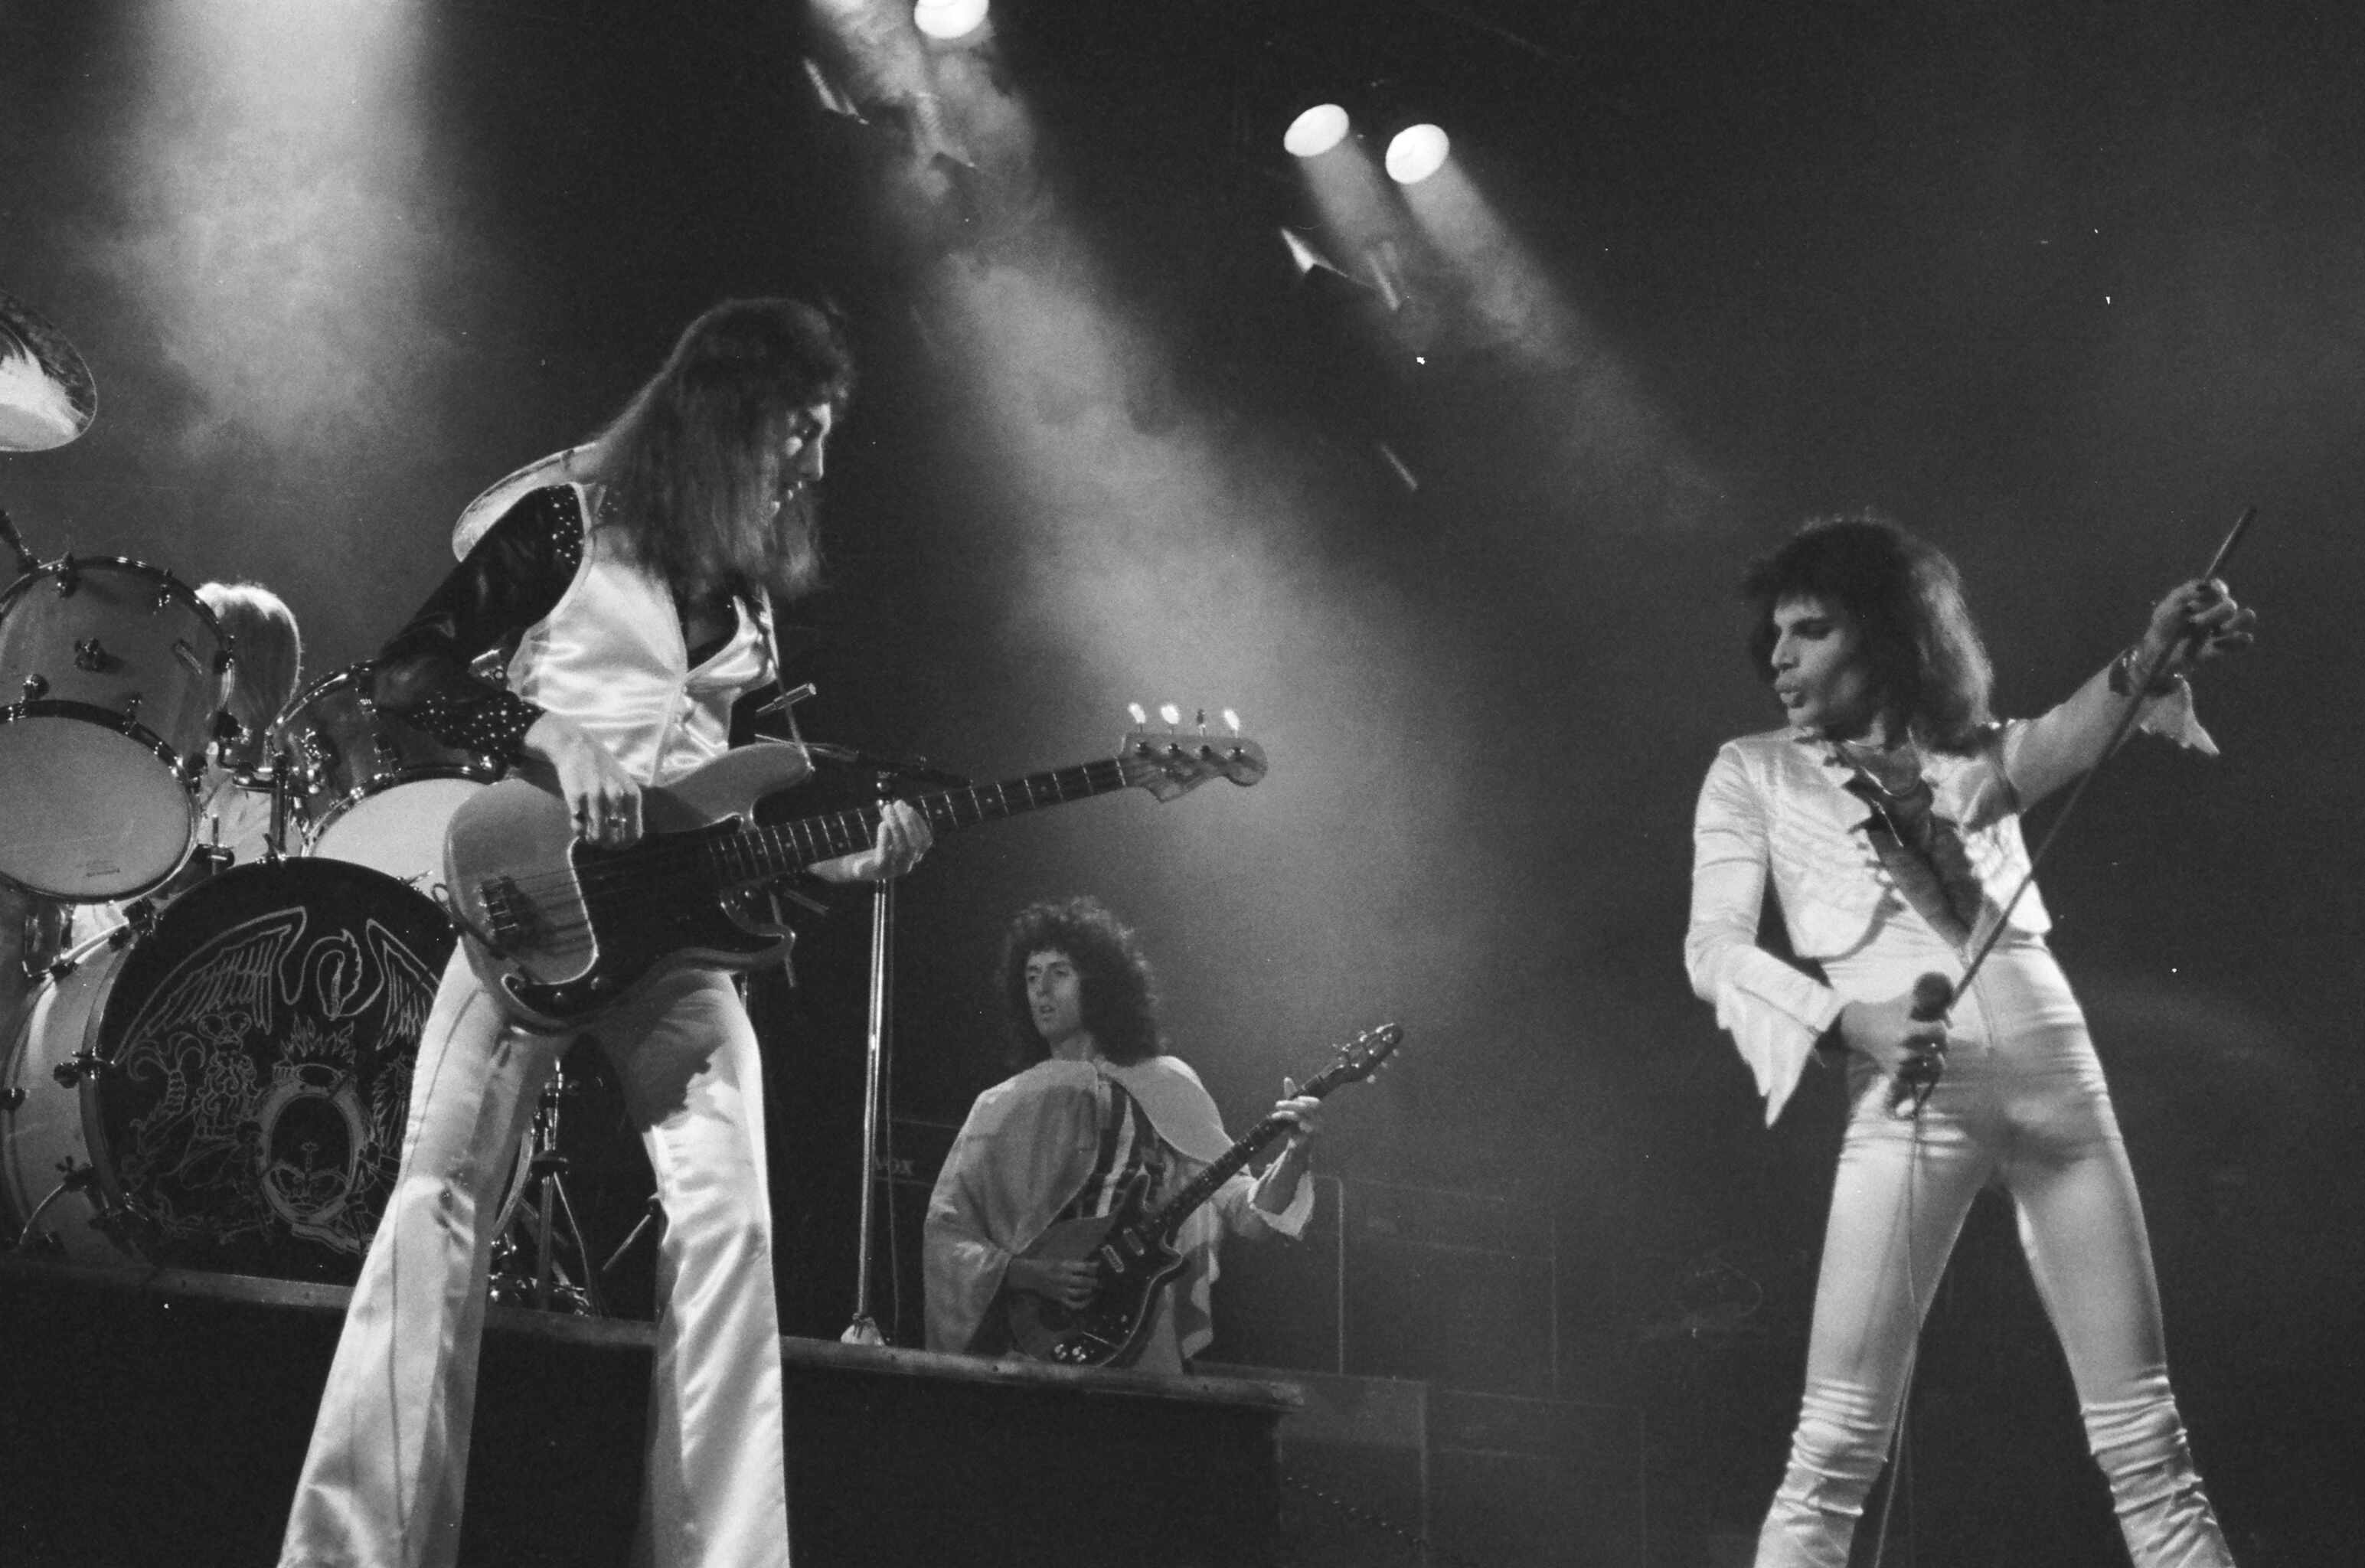 Queen: A Night at the Odeon